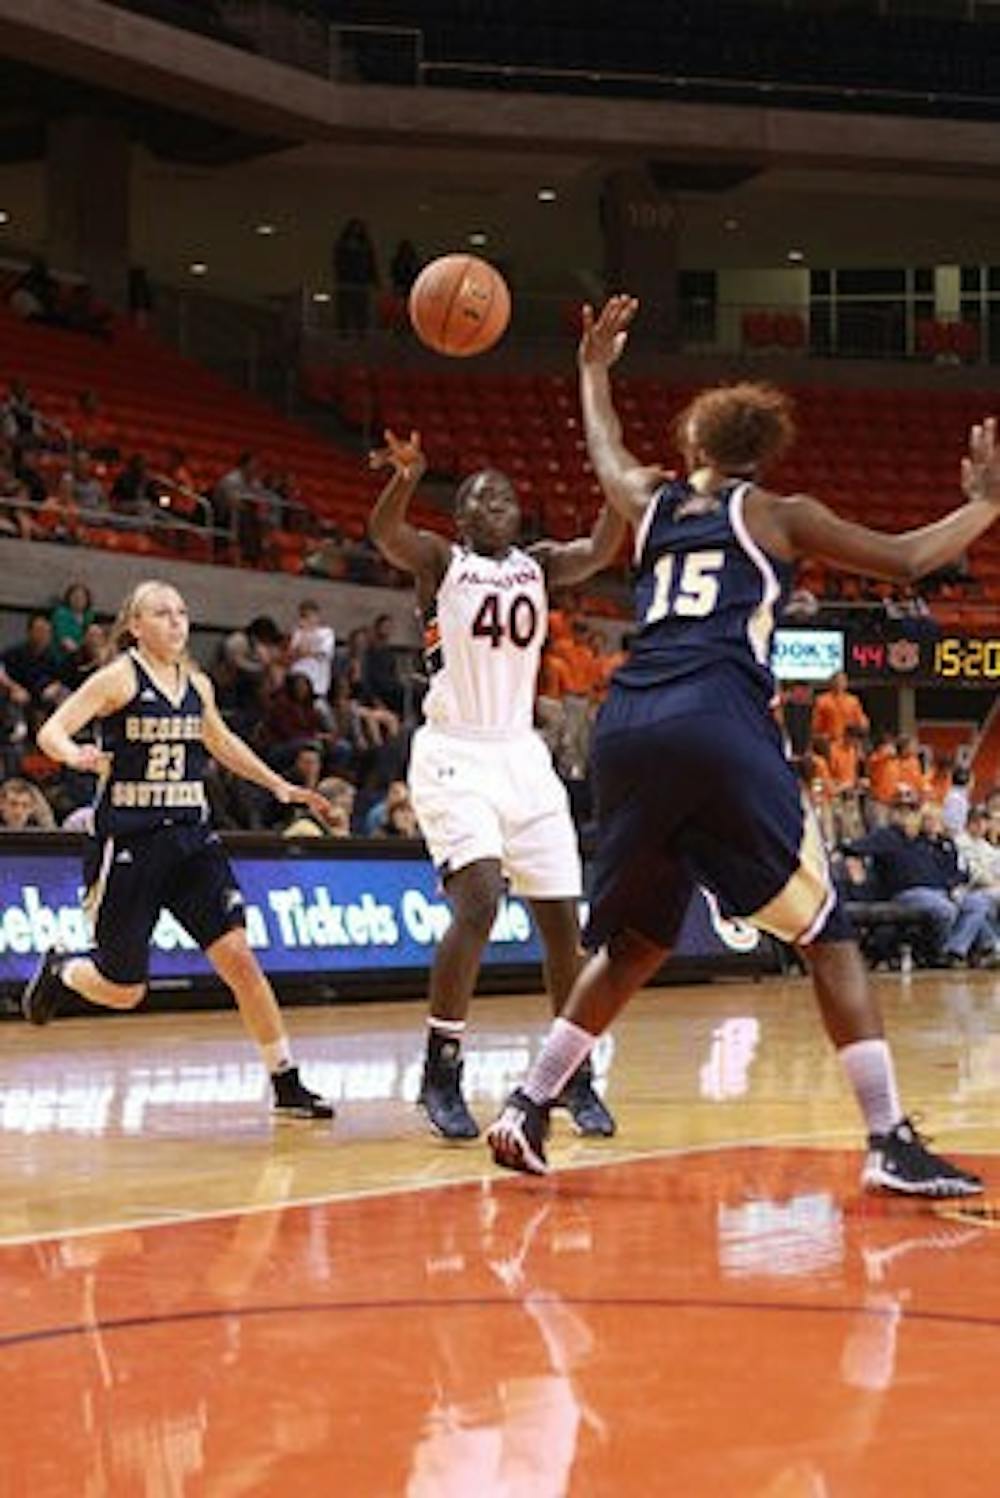 Sophomore Khady Dieng attempts a pass against Georgia Southern in 2013.